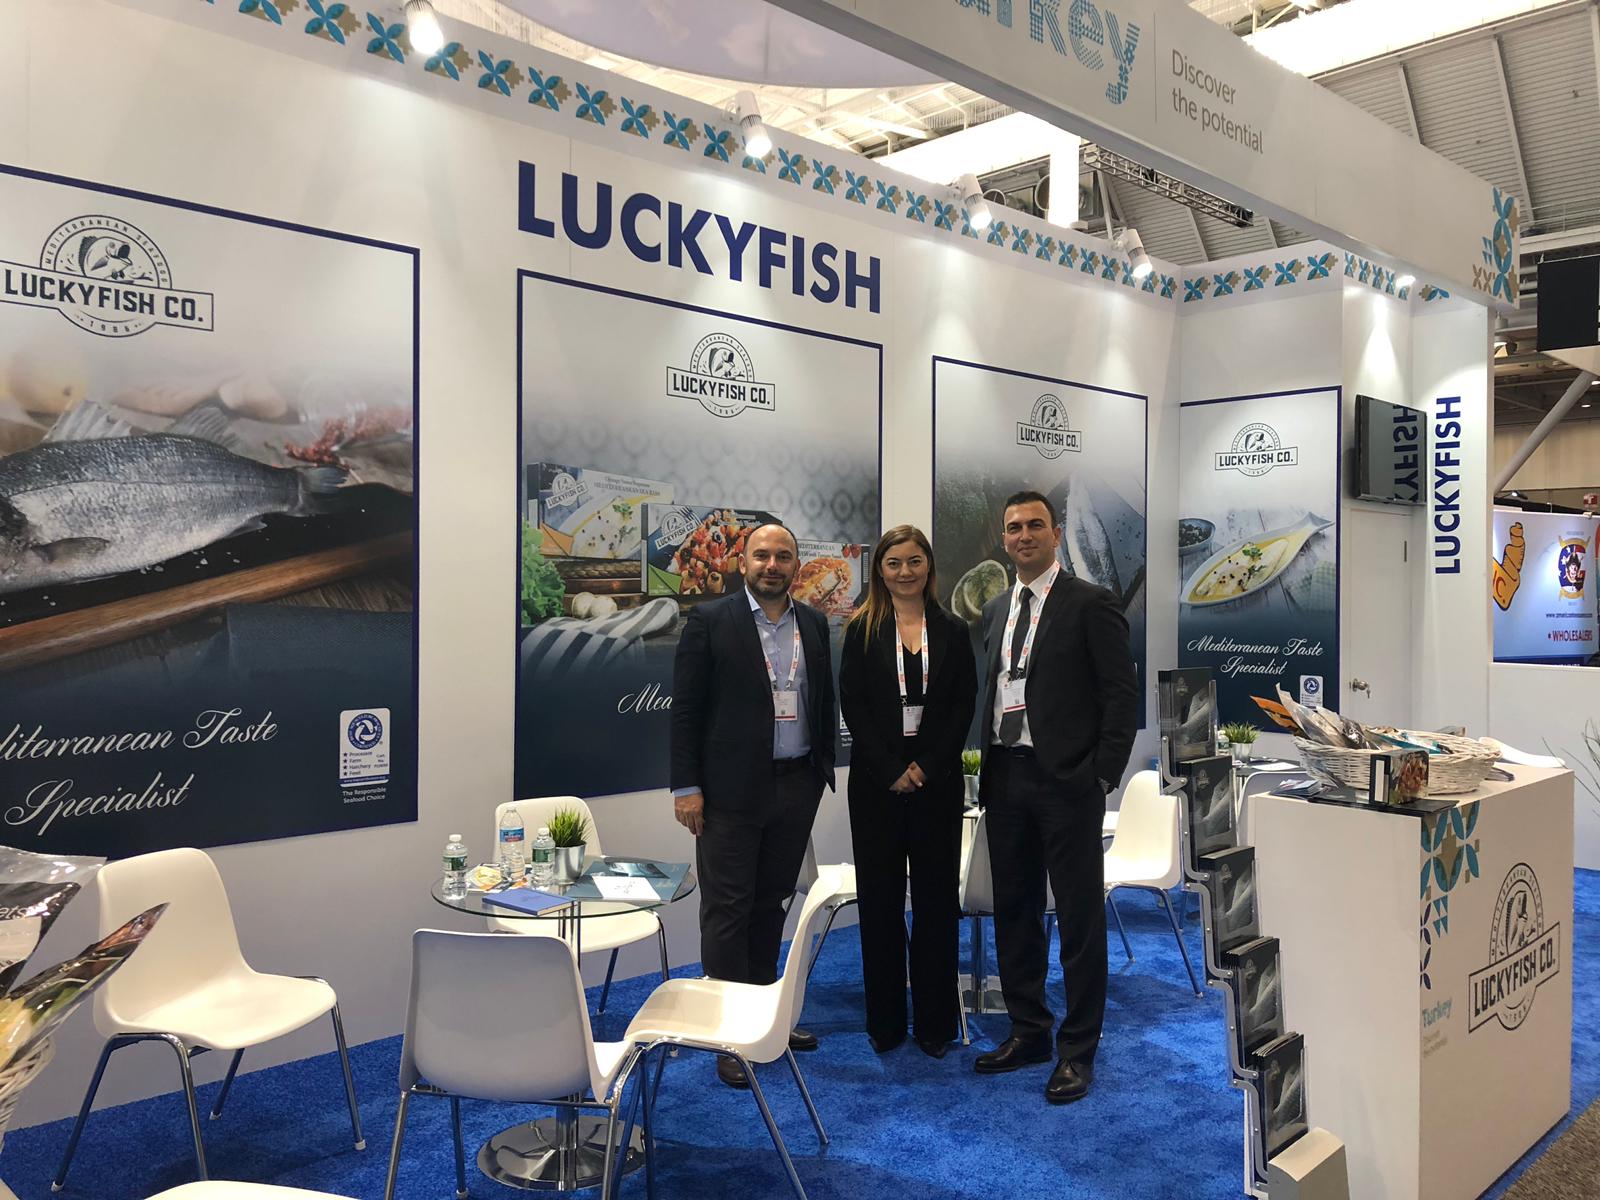 We have attended to Seafood Expo North America 2019